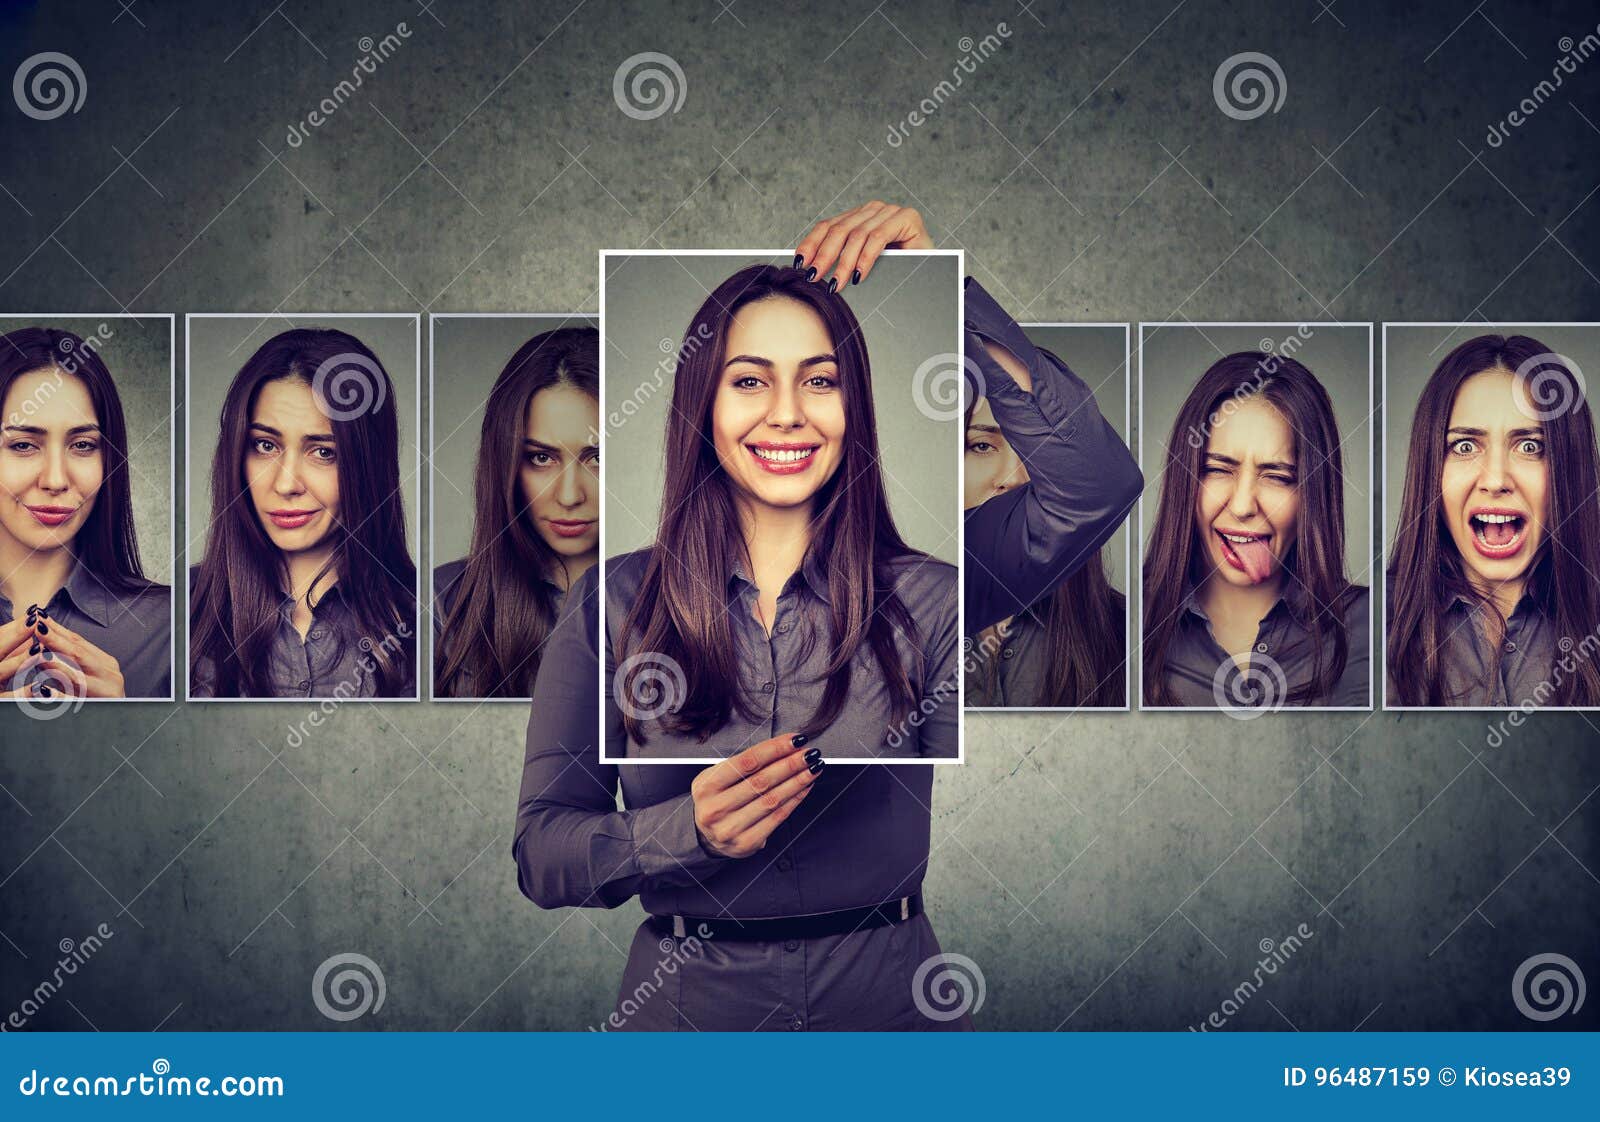 masked woman expressing different emotions